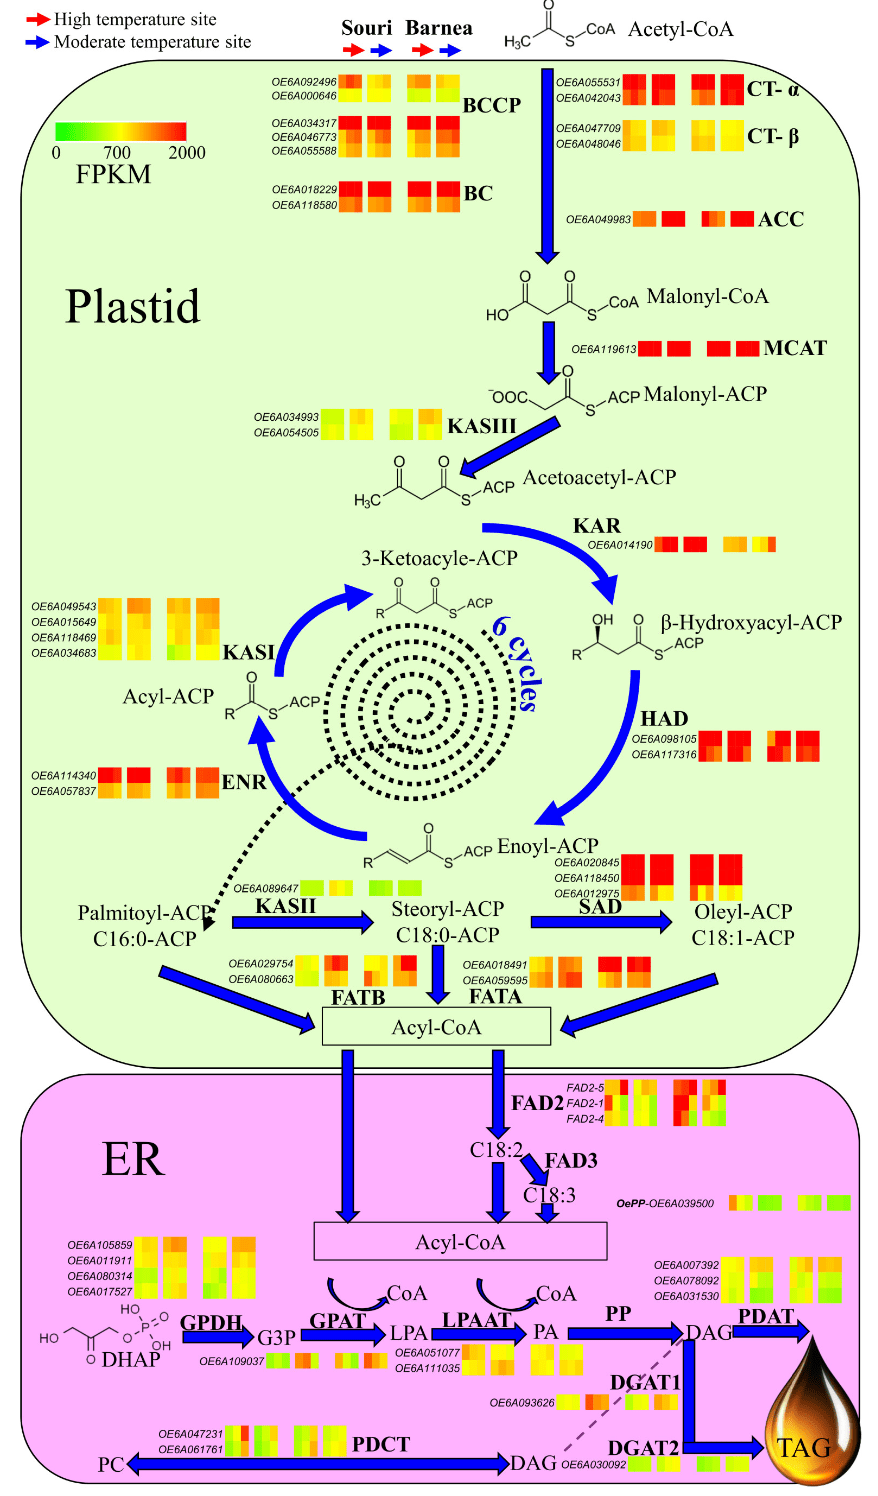 Figure 2. Expression pattern of the genes involved in the olive oil biosynthesis pathway in fruit from the HT site compared to that of fruit grown in the MT environment. Expression levels for each gene are presented in a green to red scale above or beside the name of the enzyme. For each enzyme, only genes with a FPKM of above 200 in at least one time point and environment appears. For each gene, expression level at the three time points sampled at the two environments is presented. In each gene, the six left squares represent the expression pattern in the ‘Souri’ cultivar, whereas the six right squares represent the expression pattern in the ‘Barnea’ cultivar. Within each cultivar, the three left squares represent the expression level at 83, 104 and 146 DPA in the HT environment, whereas the three right squares represent the expression level at the same sample dates in the MT environment. The various cell components appear in different colors. The reaction begins with cytosol (white background), then advances to the plastid (light green background) and terminates at the endoplasmic reticulum (ER; purple background). Abbreviations: BCCP—biotin carboxyl carrier protein, BC—biotin carboxylase, CT—carboxyl transferase, ACC—acetyl-CoA carboxylase, MCAT— malonyl-CoA:ACP transacylase, ACP—acyl carrier protein, KAS—β-ketoacyl-ACP synthase, KAR— β-ketoacyl-ACP reductase, HAD—β-hydroxyacyl-ACP dehydrase, ENR—enoyl-ACP reductase, SAD—stearoyl-ACP desaturase, FAT—fatty acyl-ACP thioesterases, FAD—fatty acid desaturases, GPDH—glycerol 3-phosphate dehydrogenase, GPAT—glycerol 3-phosphate acyltransferase, LPAAT—lysophosphatidate acyltransferase, PP—phosphatidate phosphohydrolase, PDCT— phosphatidylcholine diacylglycerol cholinephosphotransferase, DGAT—diacylglycerol acyltransferase, PDAT—phospholipid; diacylglycerol acyltransferase, DHAP—dihydroxyacetone phosphate, G3P—glycerol 3-phosphate, LPA—lysophosphatidate, PA—phosphatidate, DAG— diacylglycerol, PC—phosphatidylcholine, TAG—triacylglycerol.